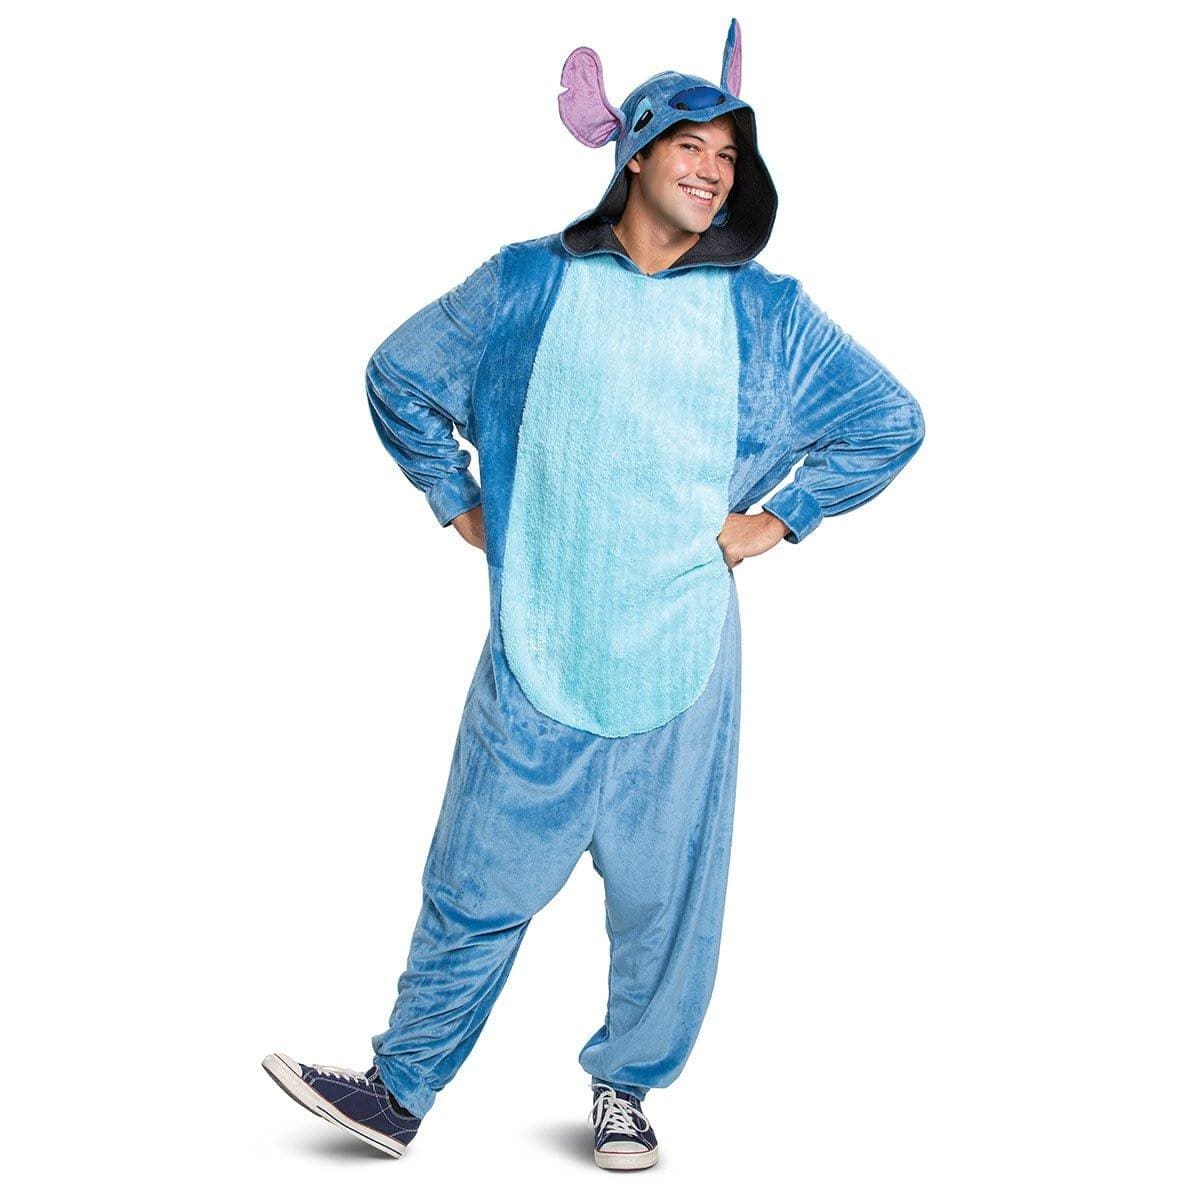 Buy Costumes Stitch Costume for Adults, Lilo & Stitch sold at Party Expert